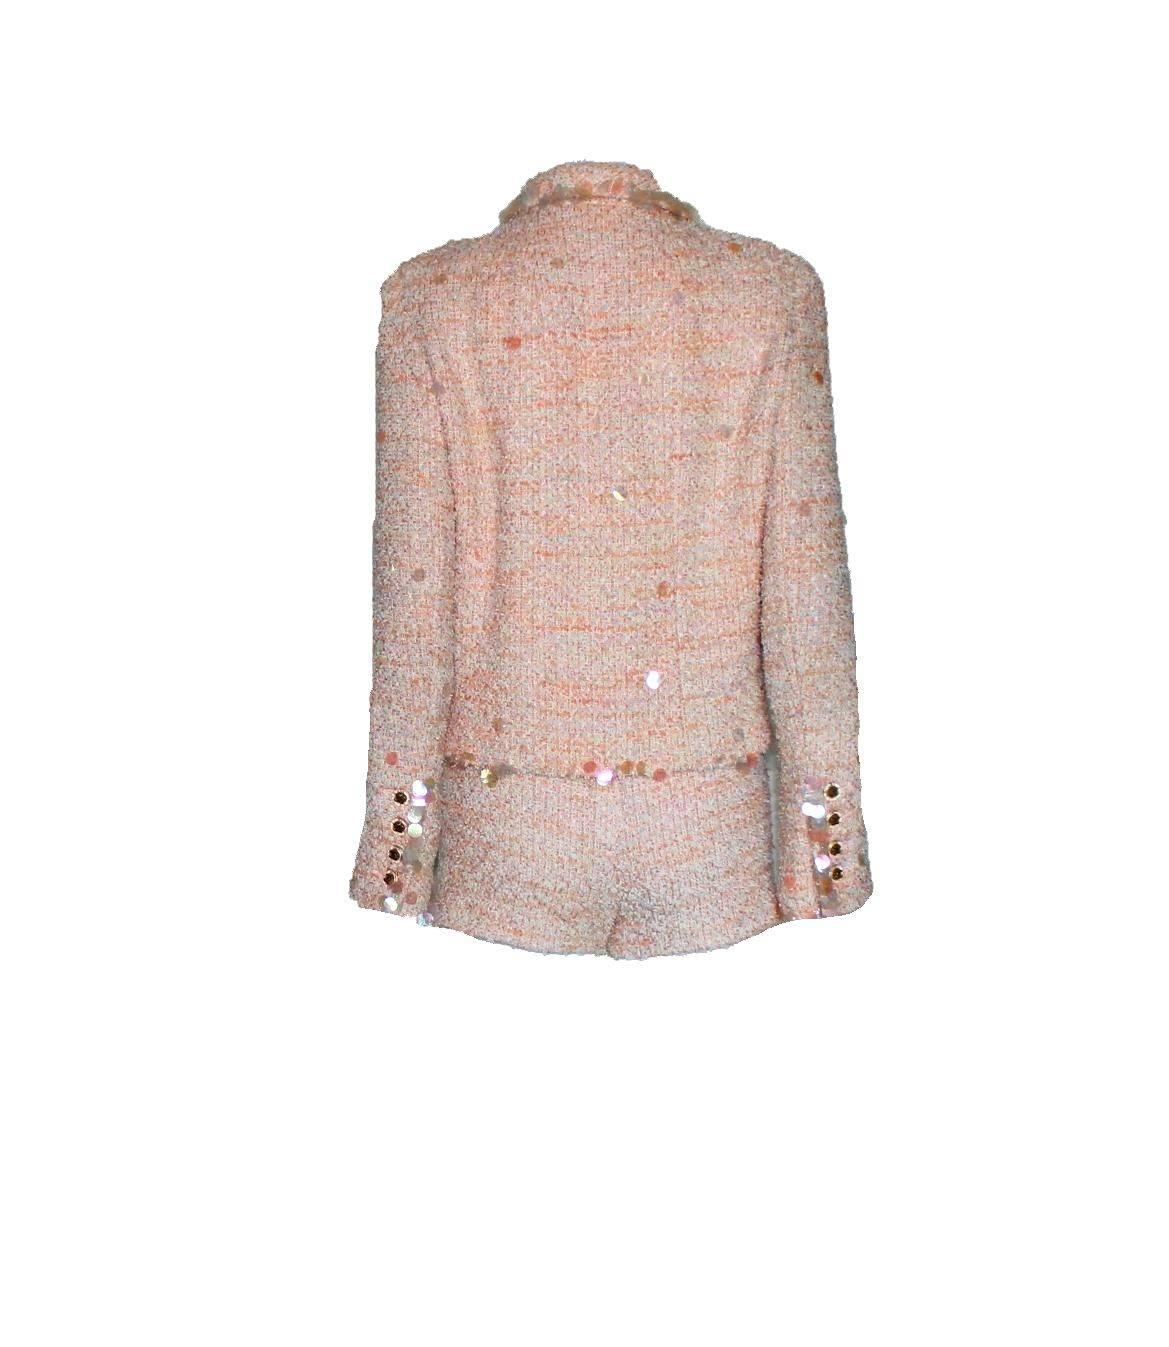 Amazing Chanel suit
In the signature fantasy tweed fabric exclusively produced by Maison Lesage
Designed by Karl Lagerfeld for his iconic 1995 Chanel collection
Collectable item
Shiny big sequins
CC logo buttons on sleeves
Amazing pastel